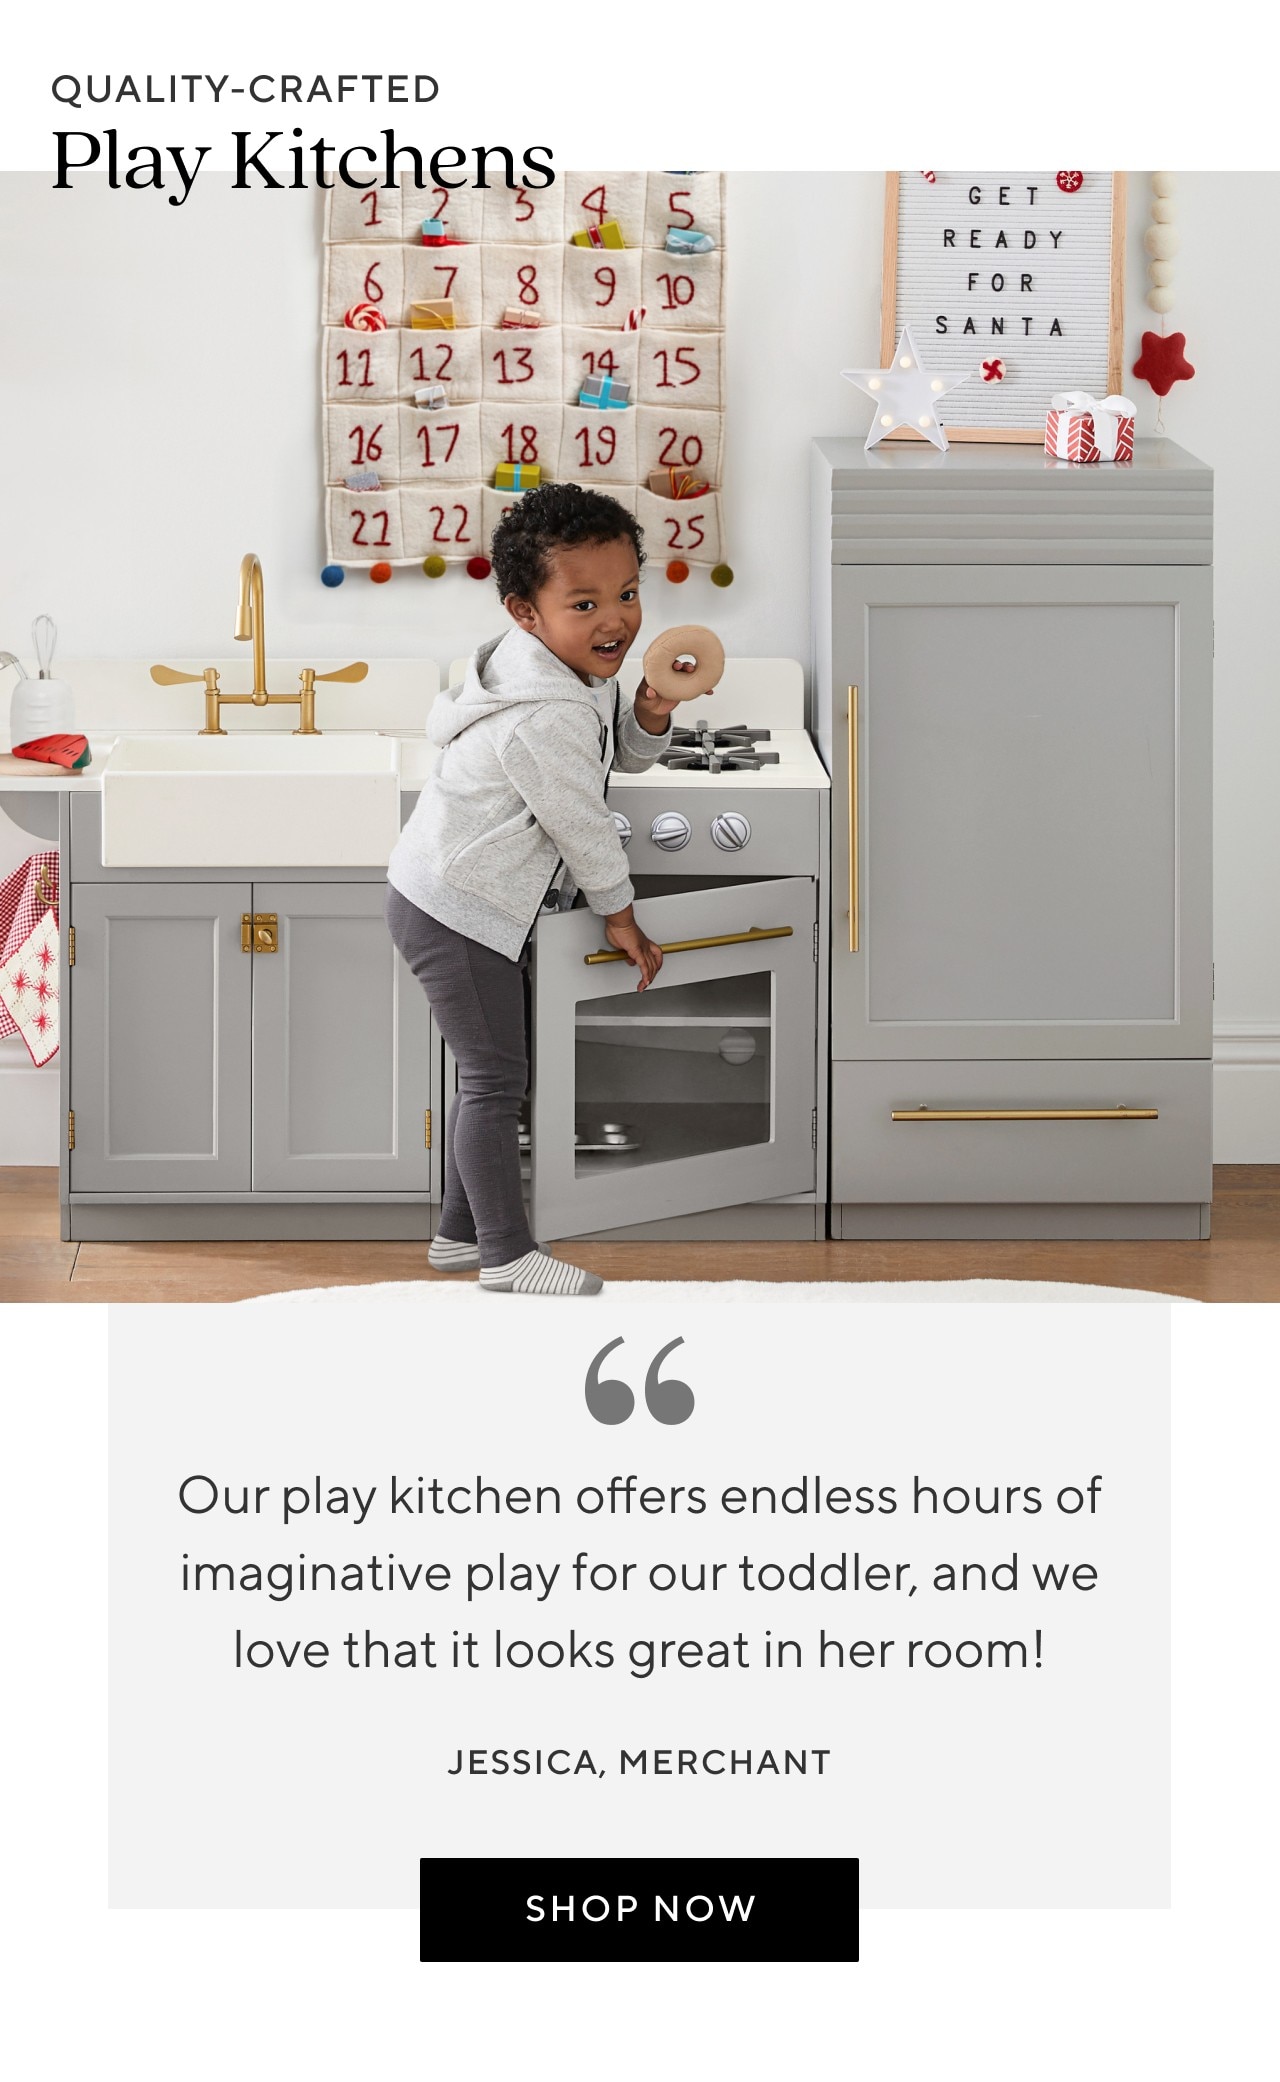 QUALITY-CRAFTED PLAY KITCHENS